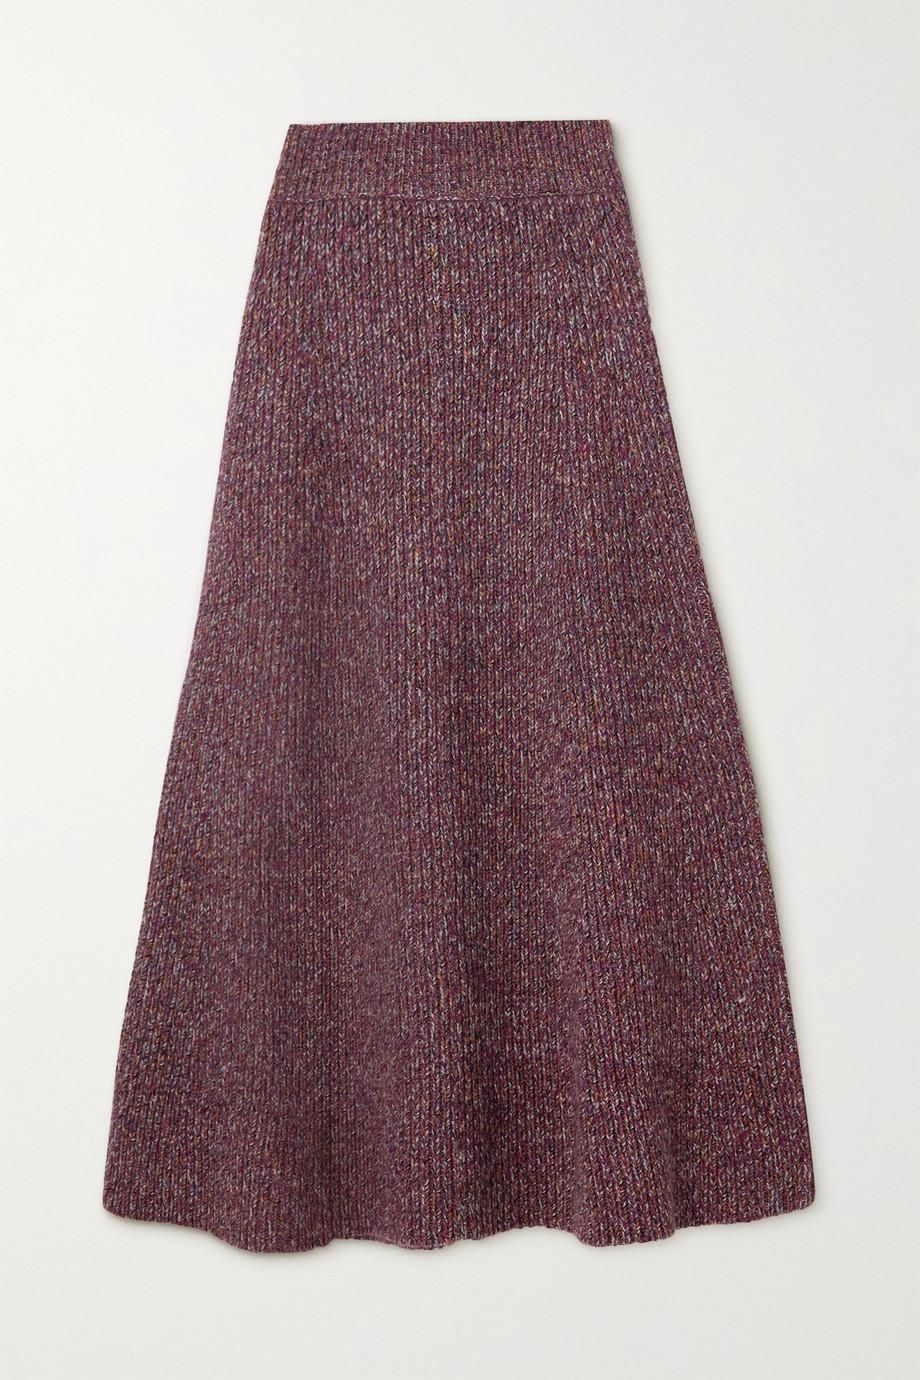 chloe ribbed cashmere and wool blend midi skirt